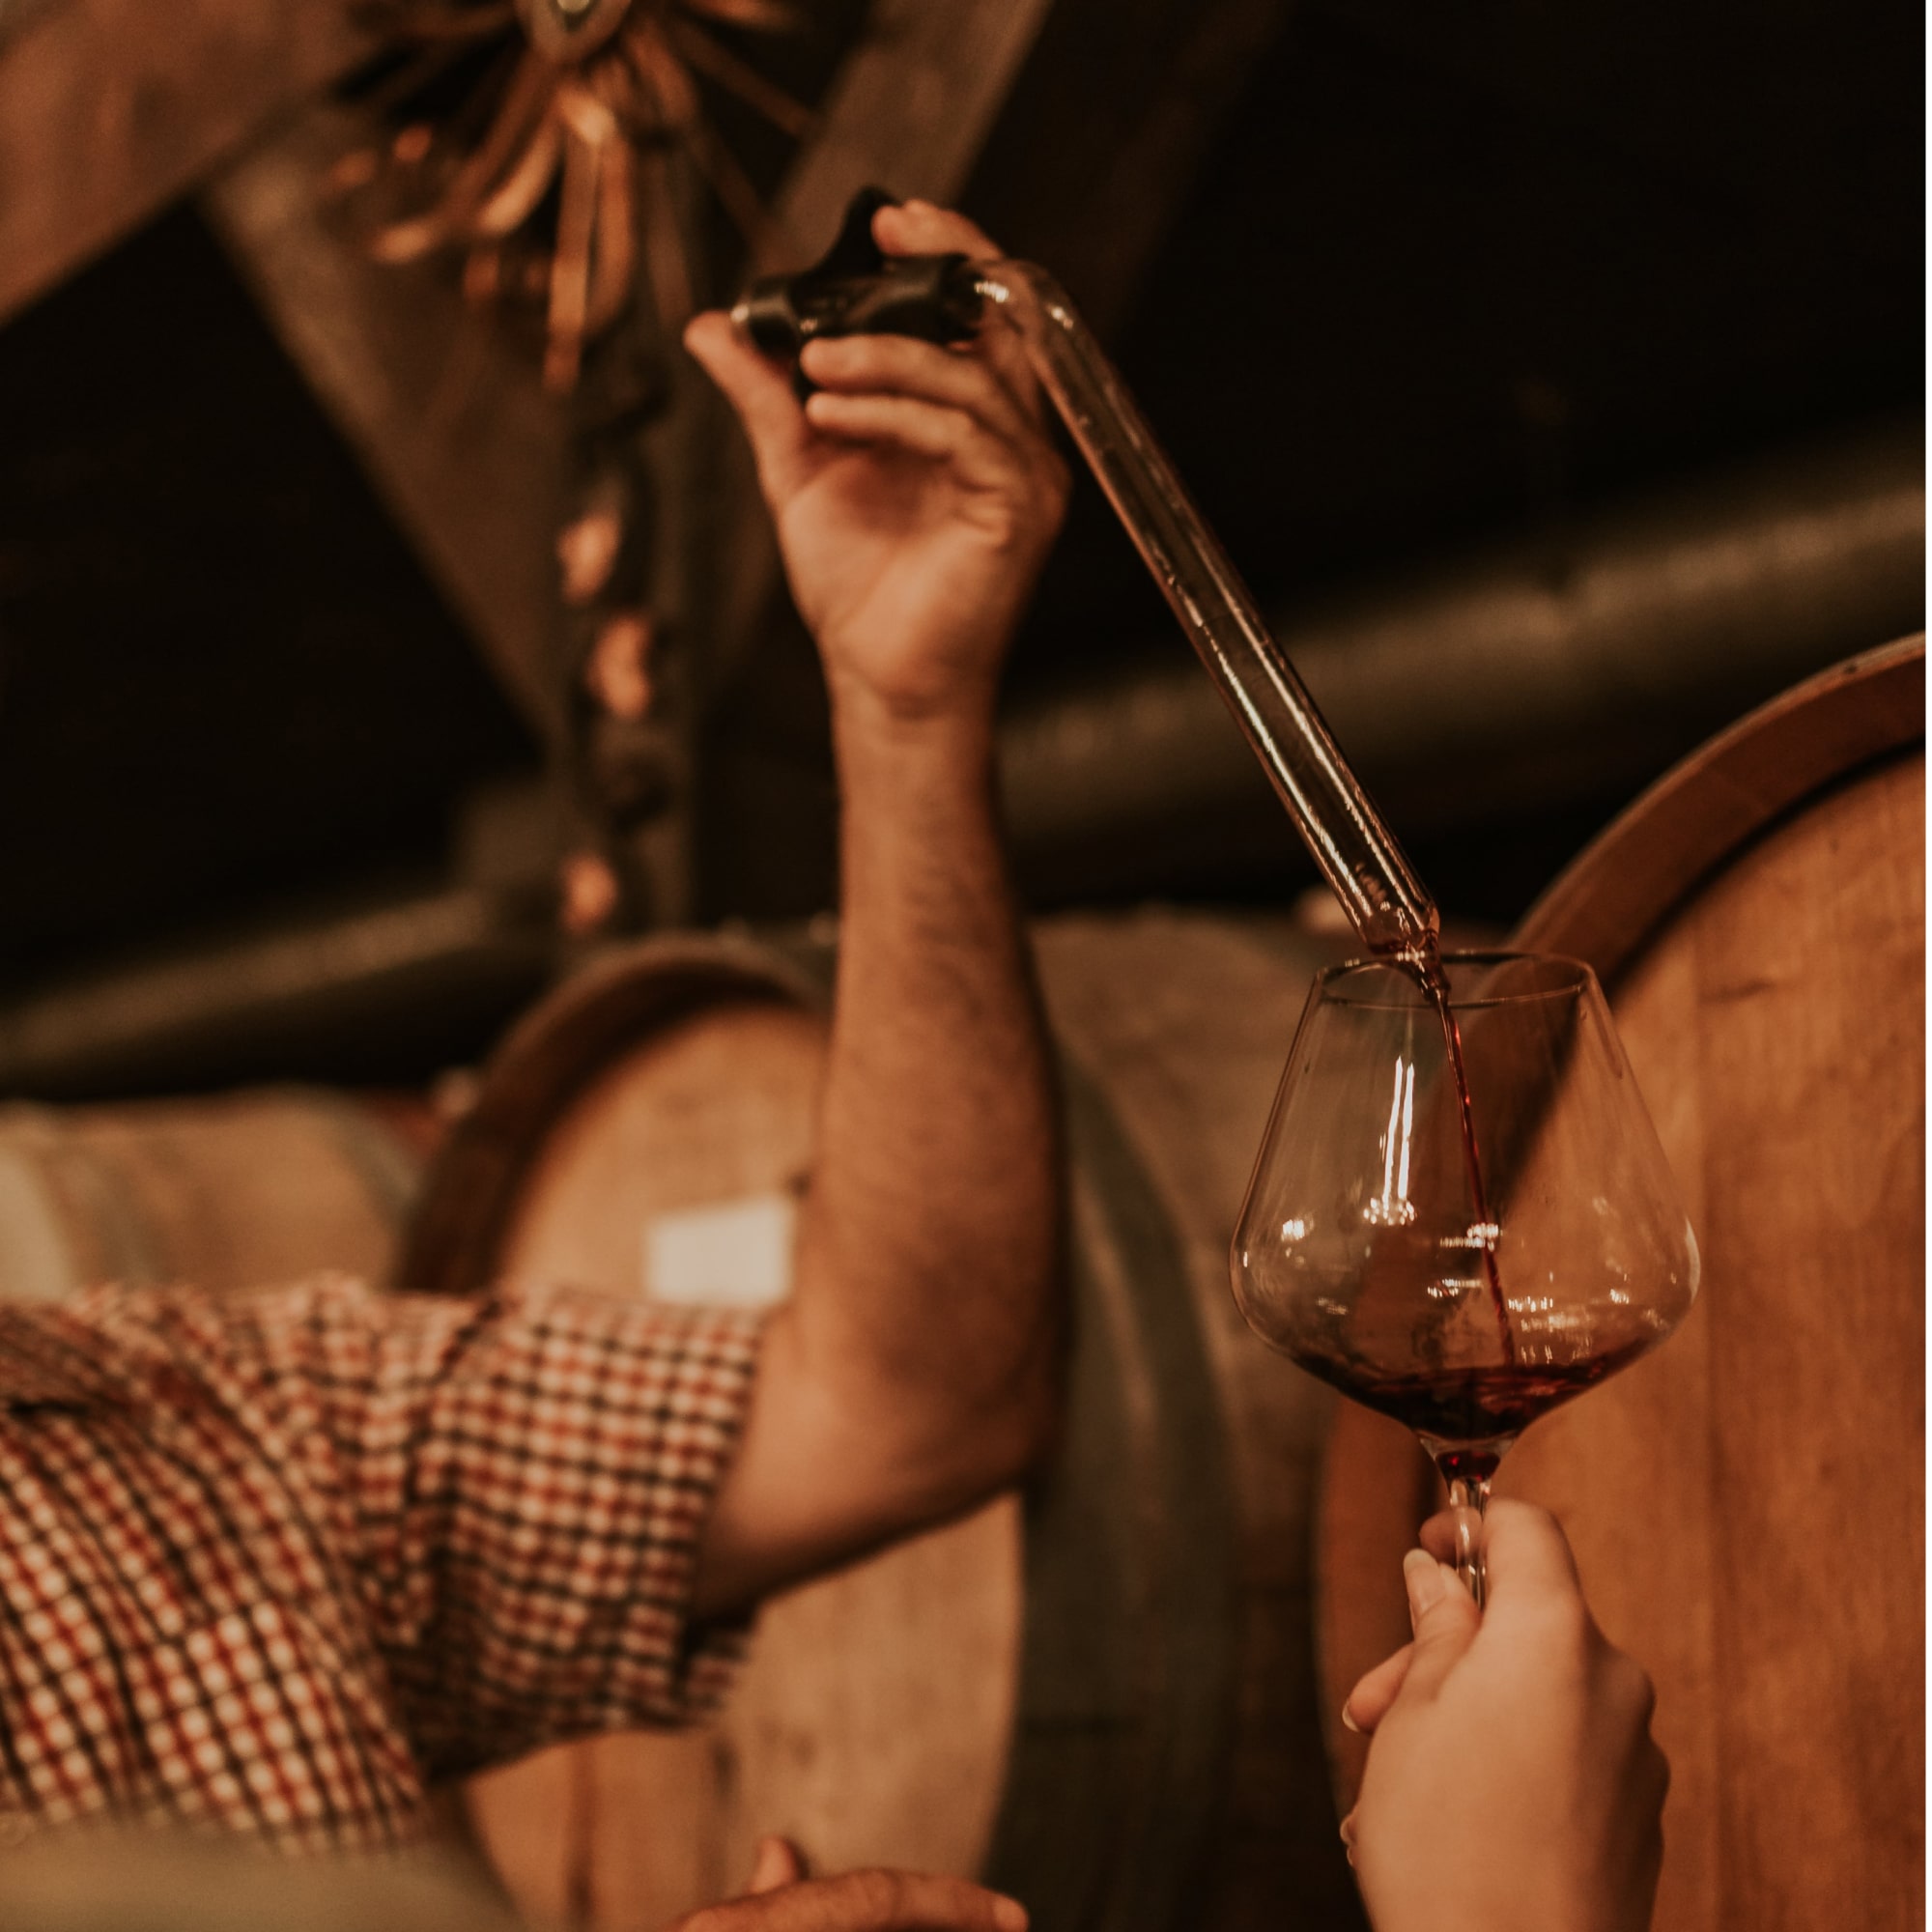 A man pouring wine into a glass, showcasing the art of wine-making at a winery.